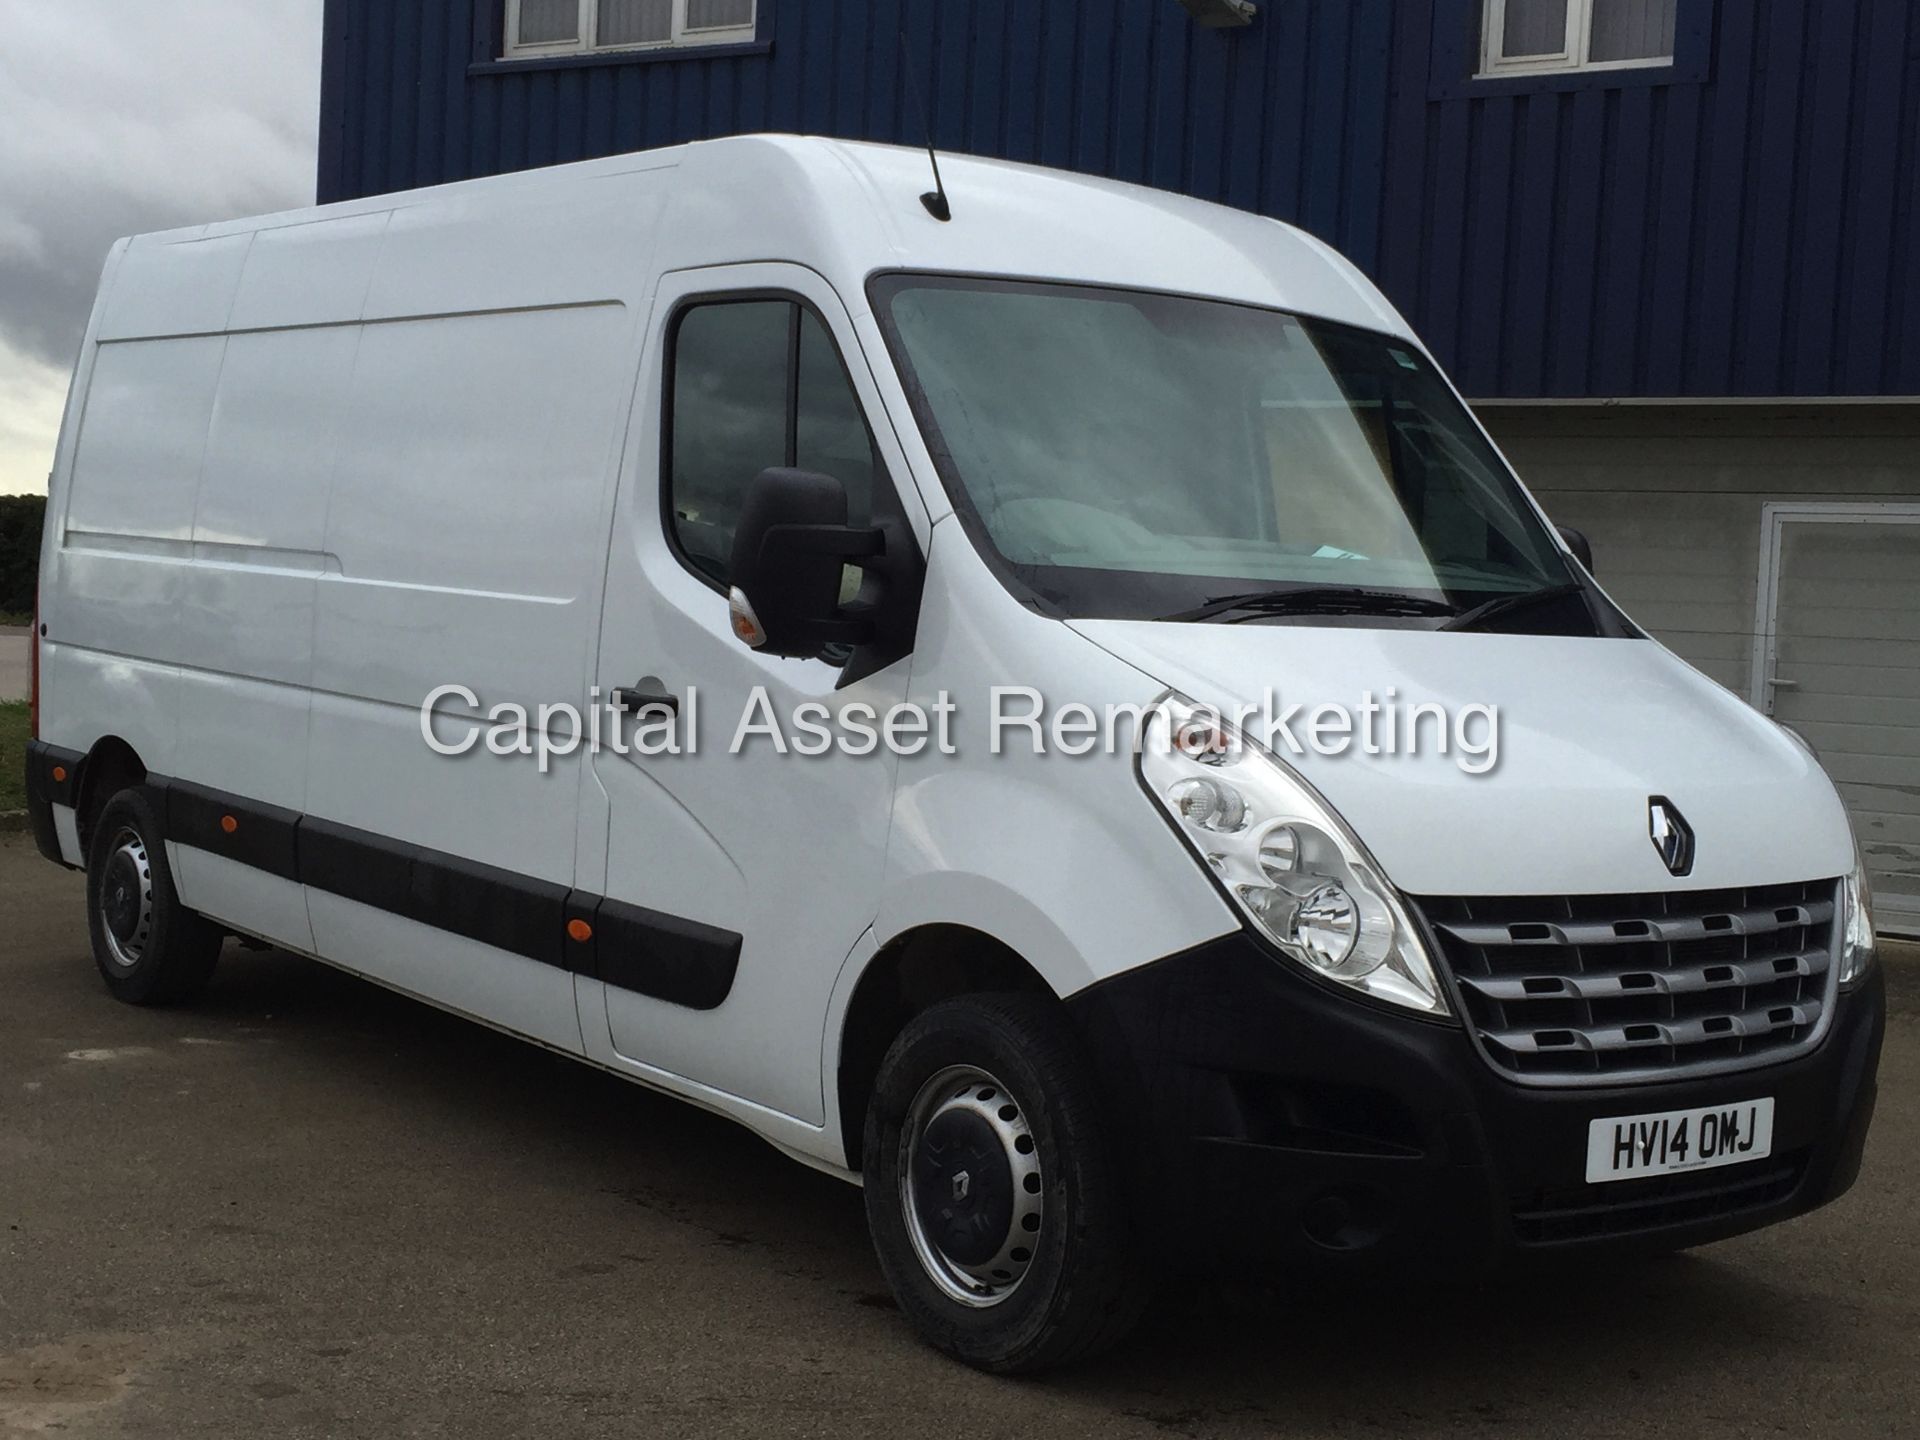 (ON SALE) RENAULT MASTER LM35 'EXTRA' (2014 - 14 REG) 2.3 DCI - 6 SPEED - AIR CON  (1 COMPANY OWNER)